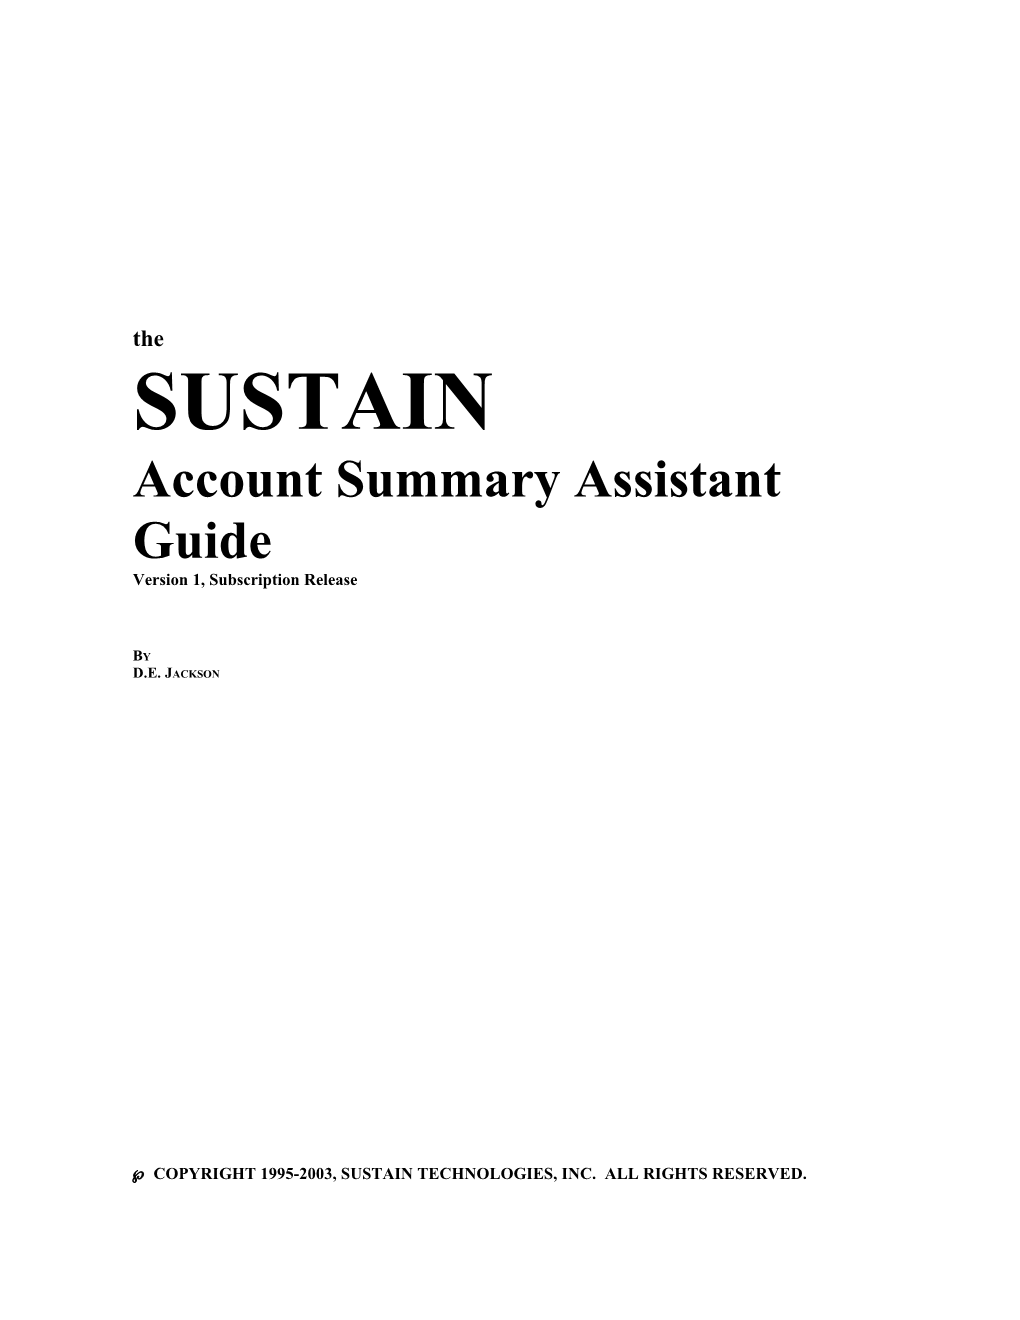 The SUSTAIN Account Summary Assistant Guide